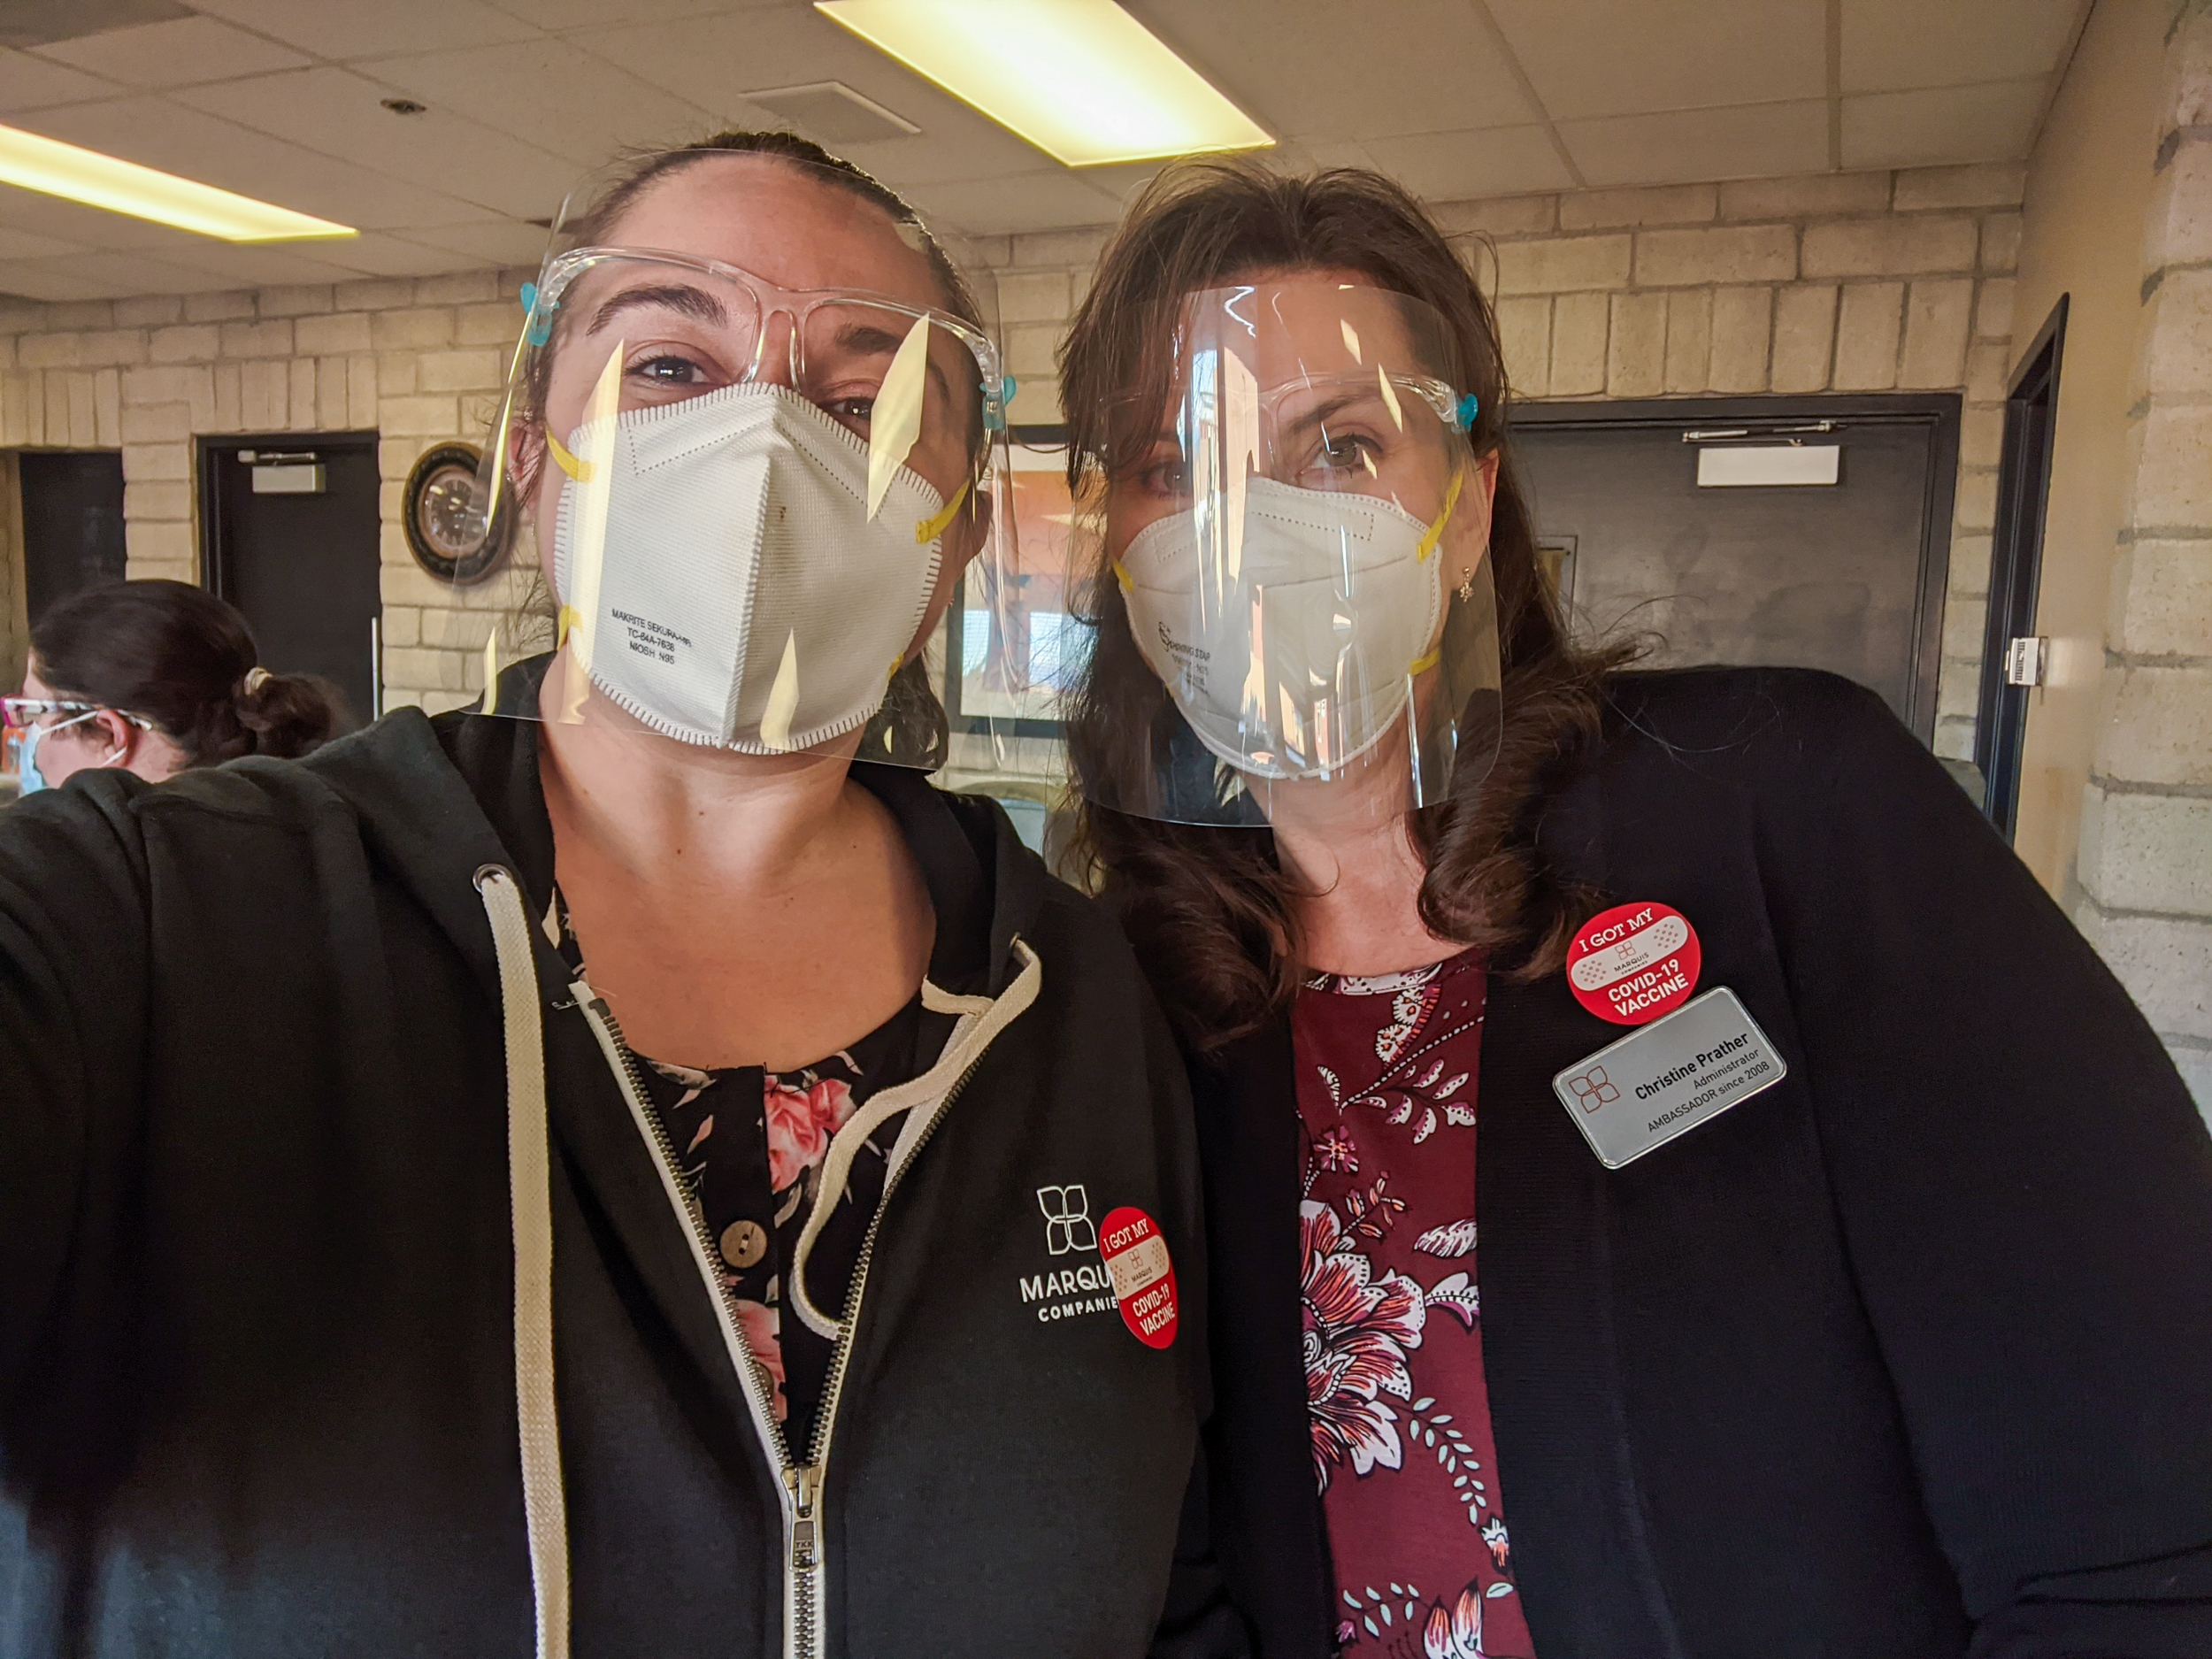 Marquis Plum Ridge Administrator, Christine Prather, and Business Office Manager, Vanessa Morrow, show off their "I Got My COVID-19 Vaccine" stickers.